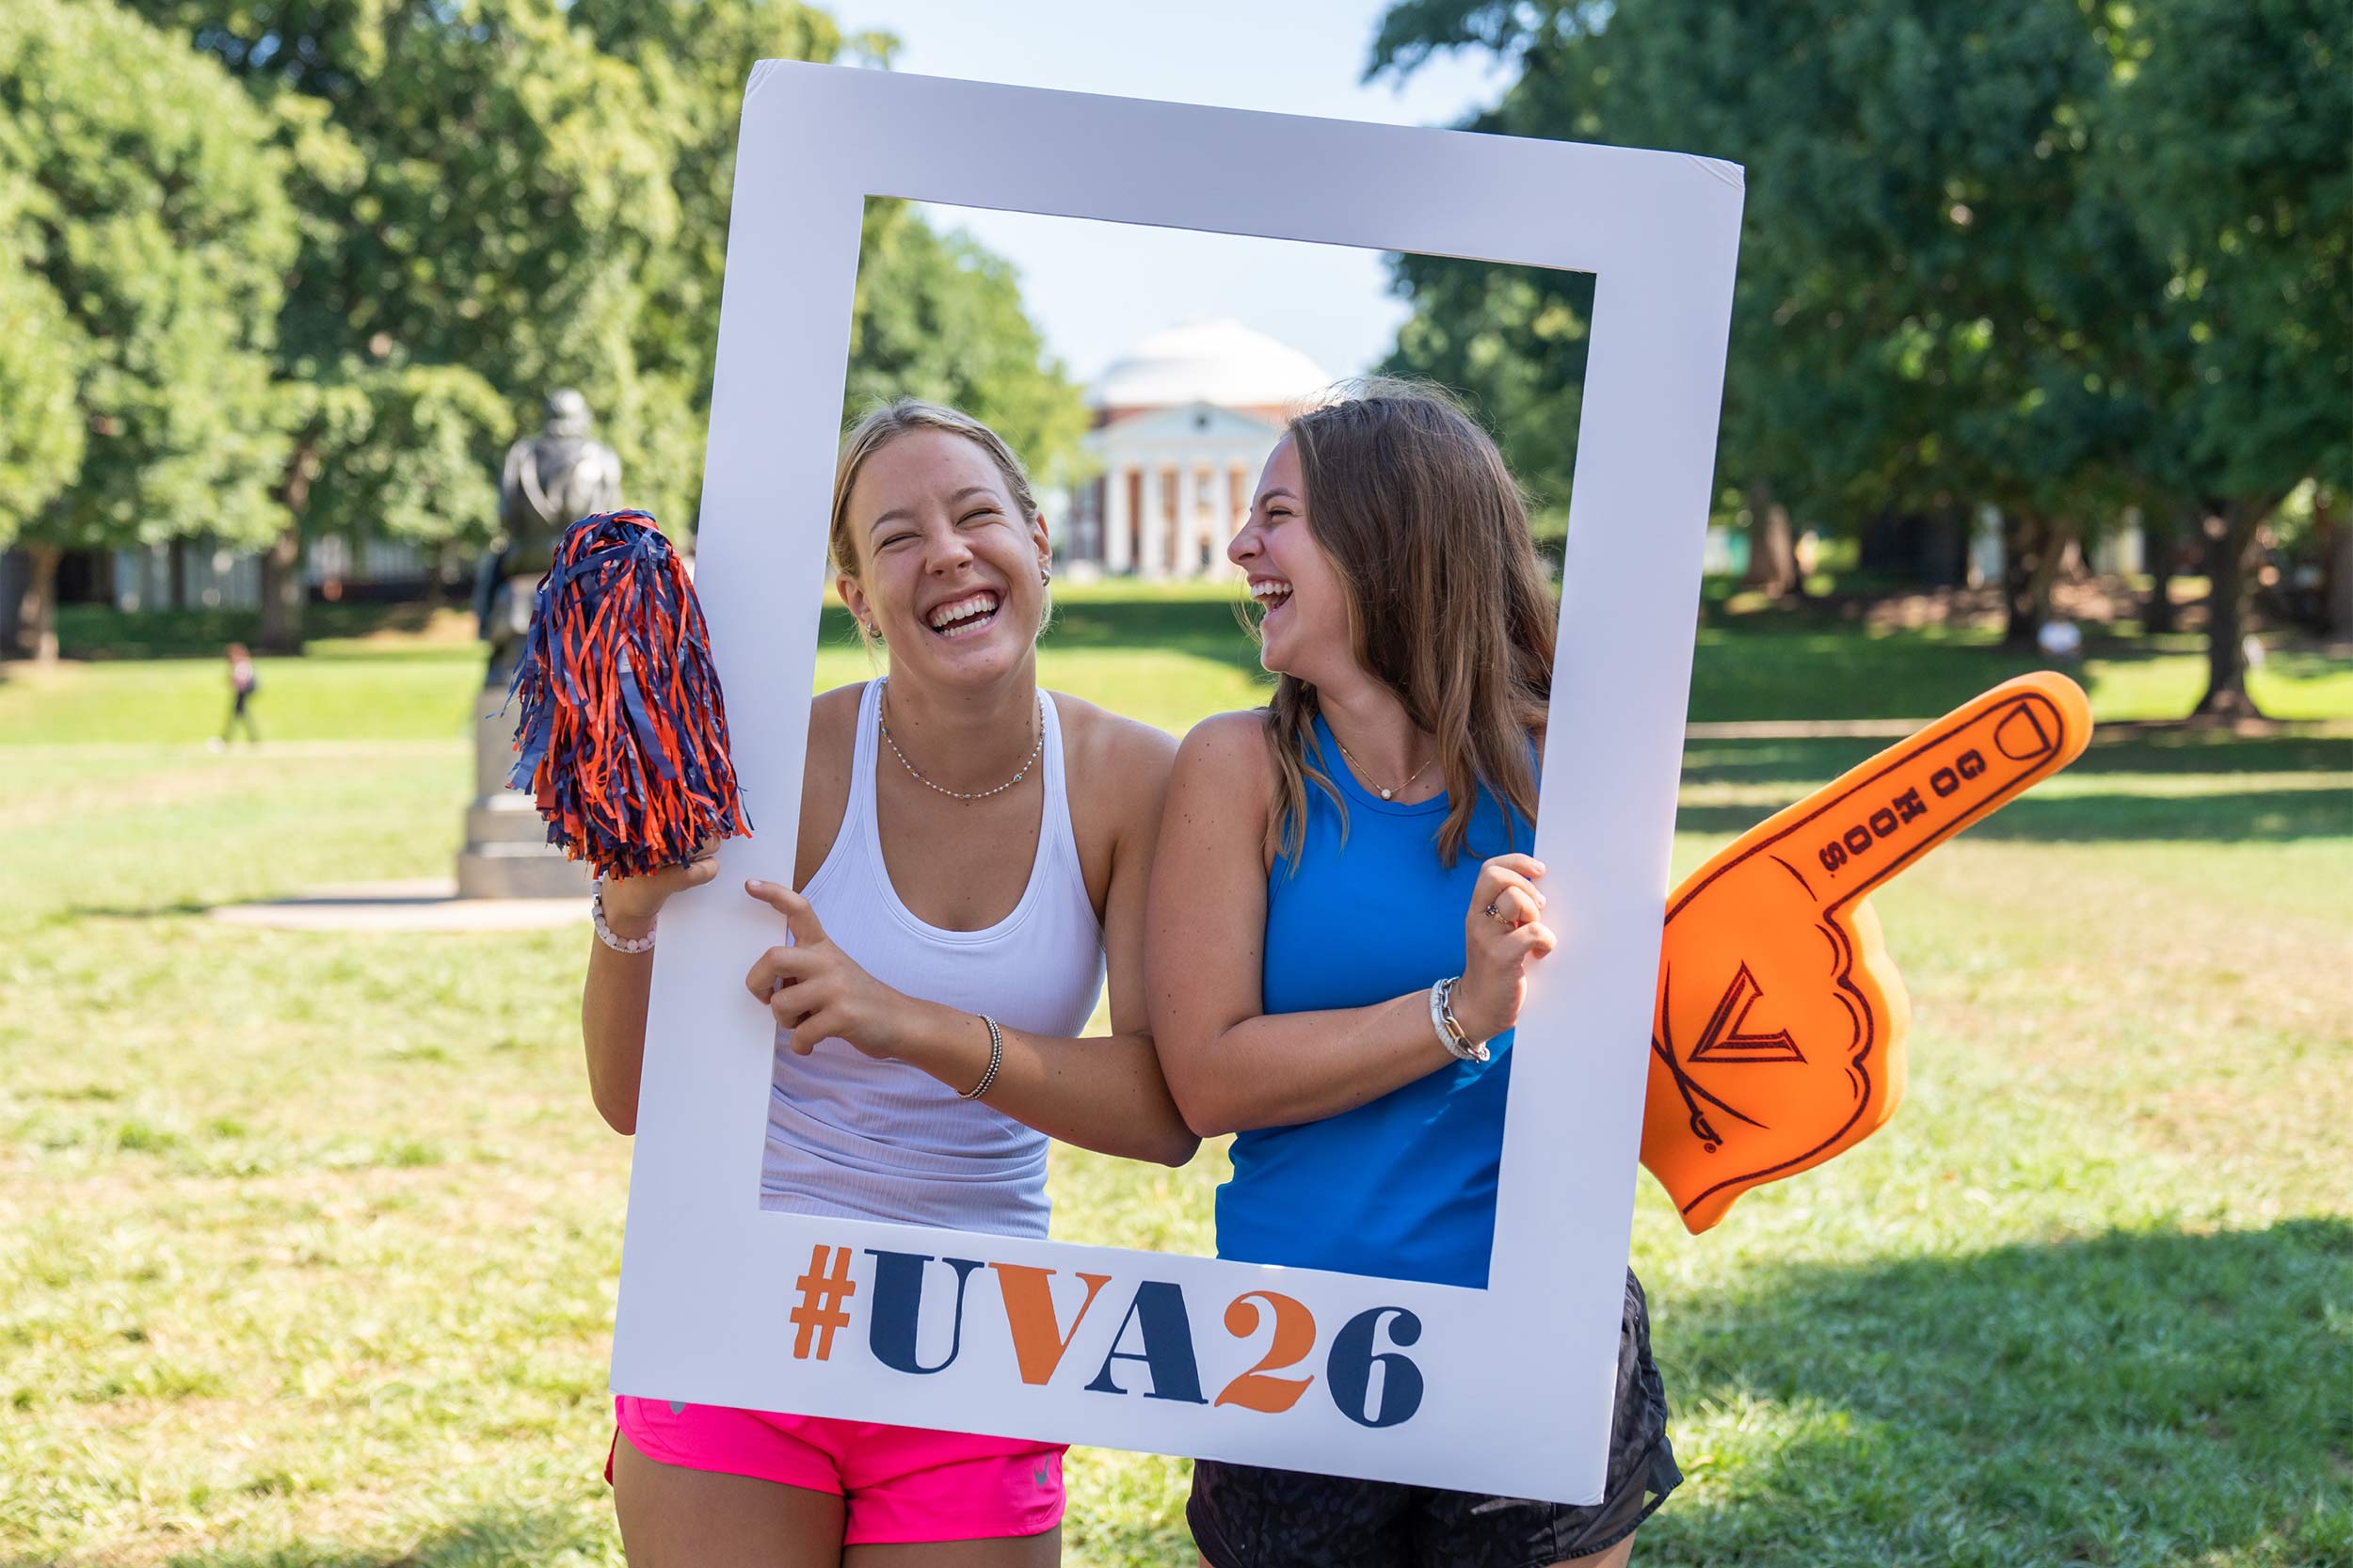 Two students holding the #UVA26 frame laugh together